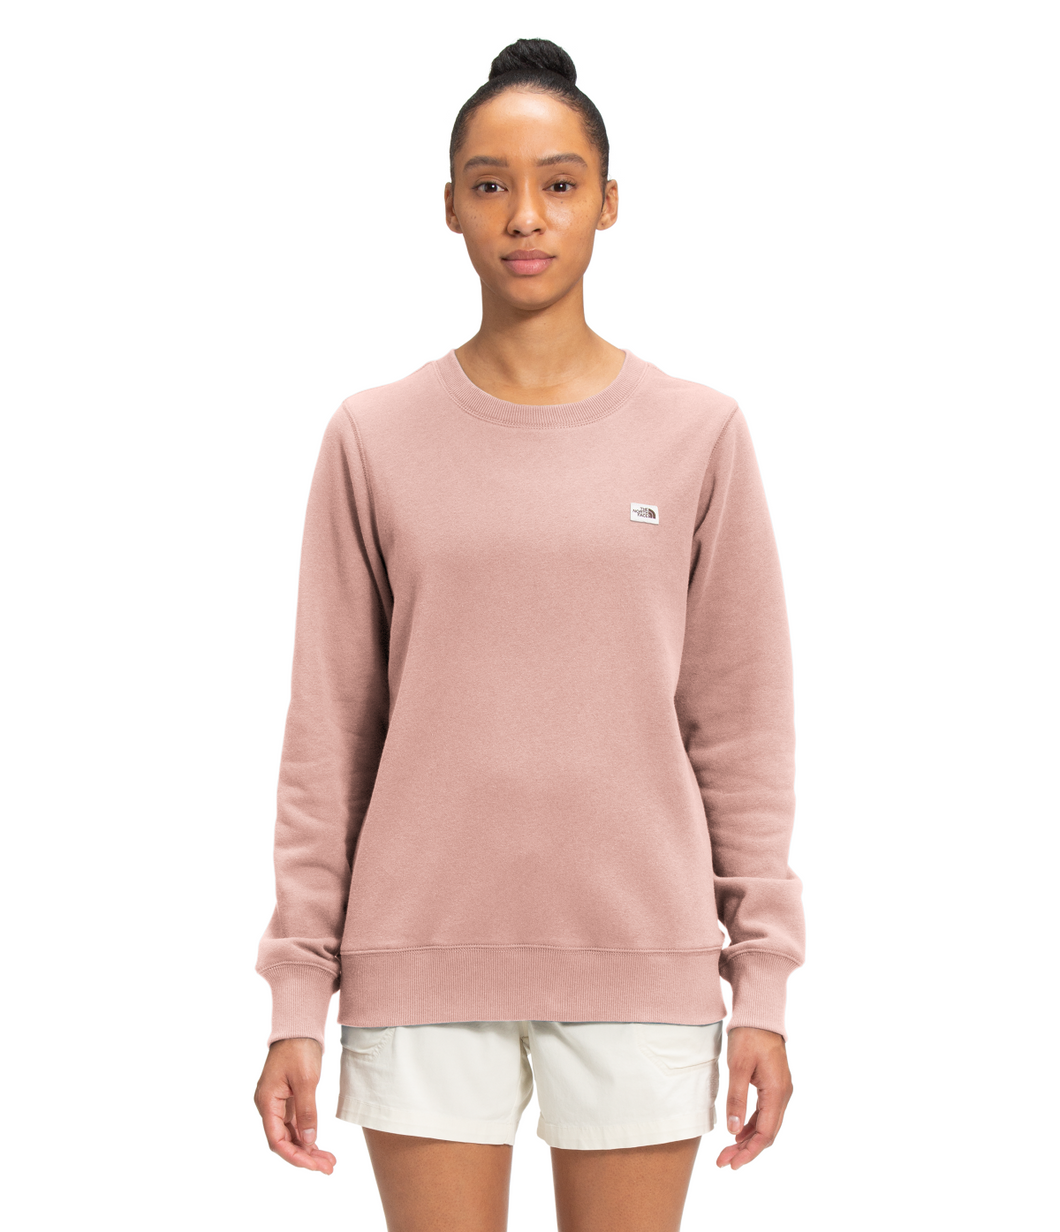 'The North Face' Women's Heritage Patch Crew Pullover - Evening Sand Pink Heather